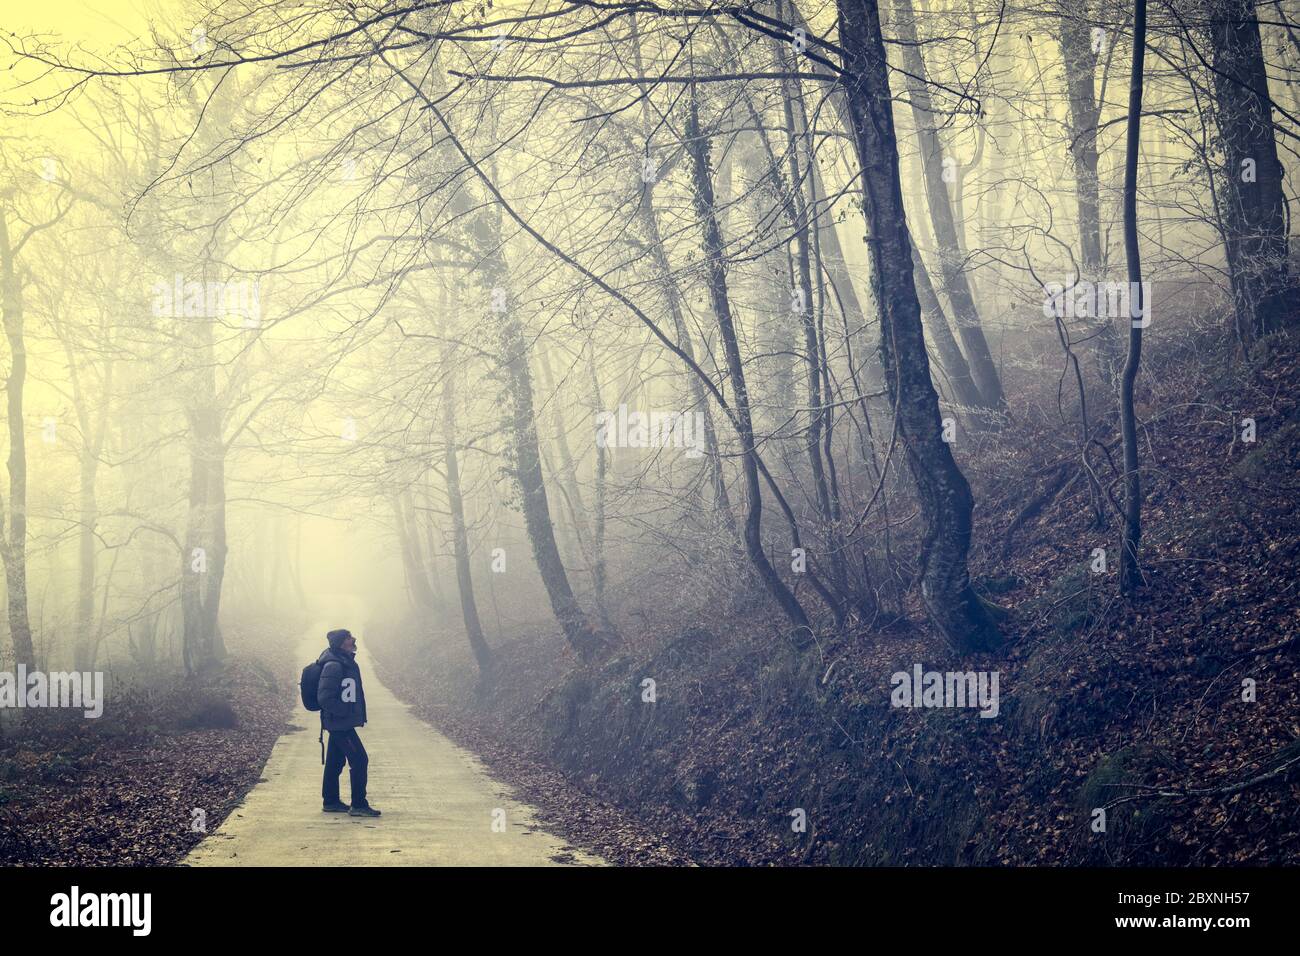 Man in a foggy beech forest. Stock Photo